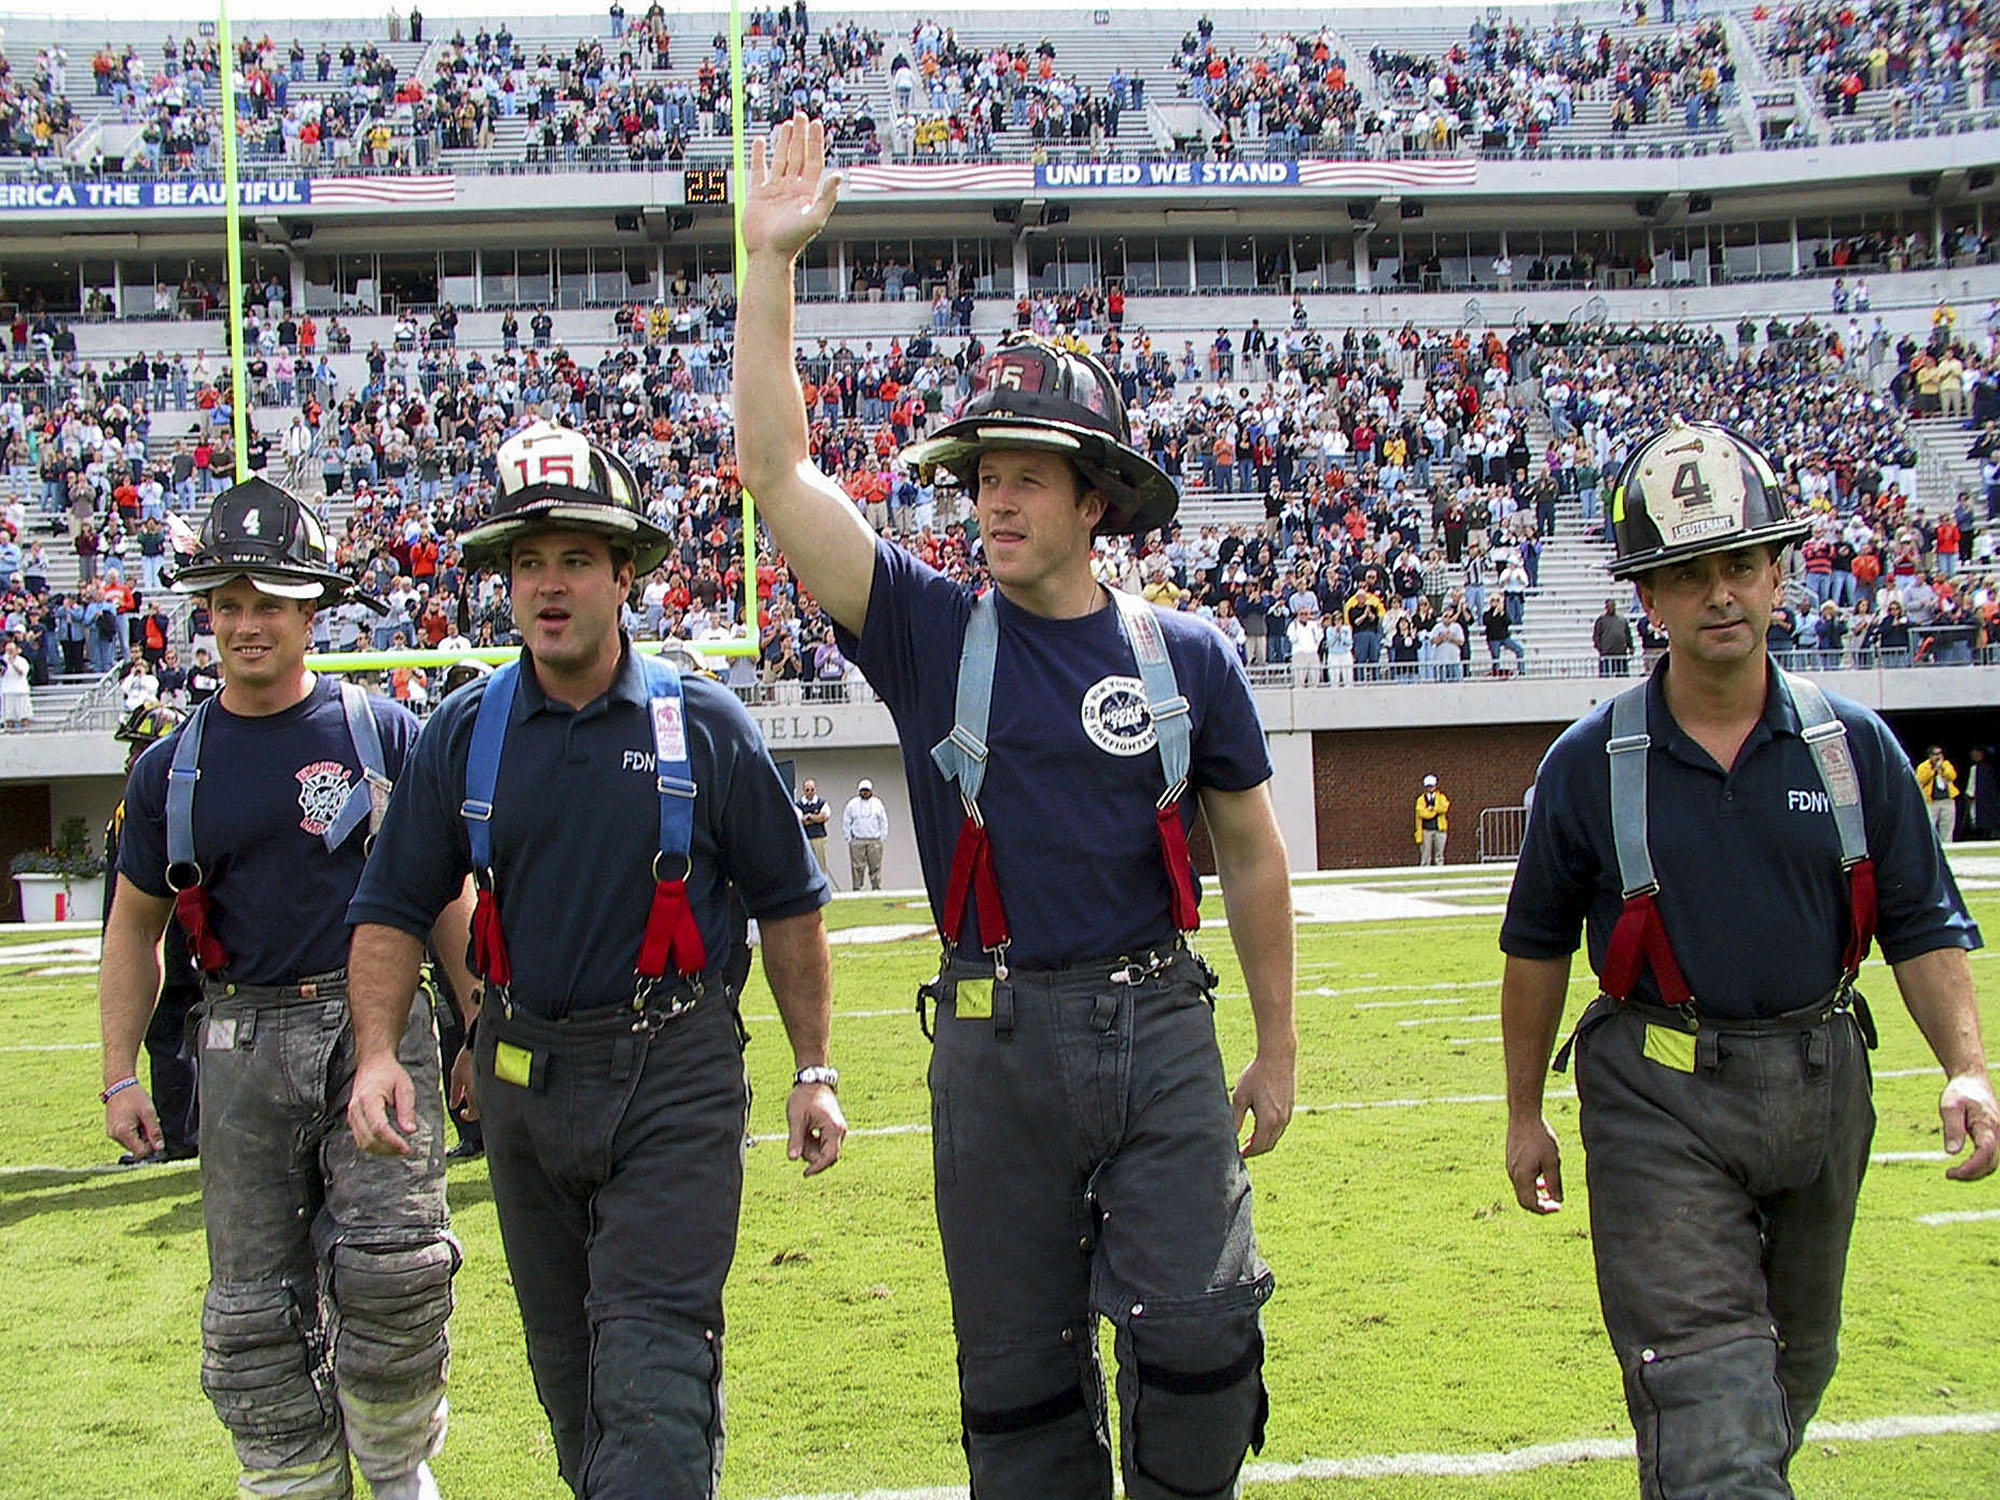 four representatives of the New York City Fire Department – Lts. Jim Milone and Charlie Noseworthy and firefighters Joe Gildea and Rich Amthor walk onto the field